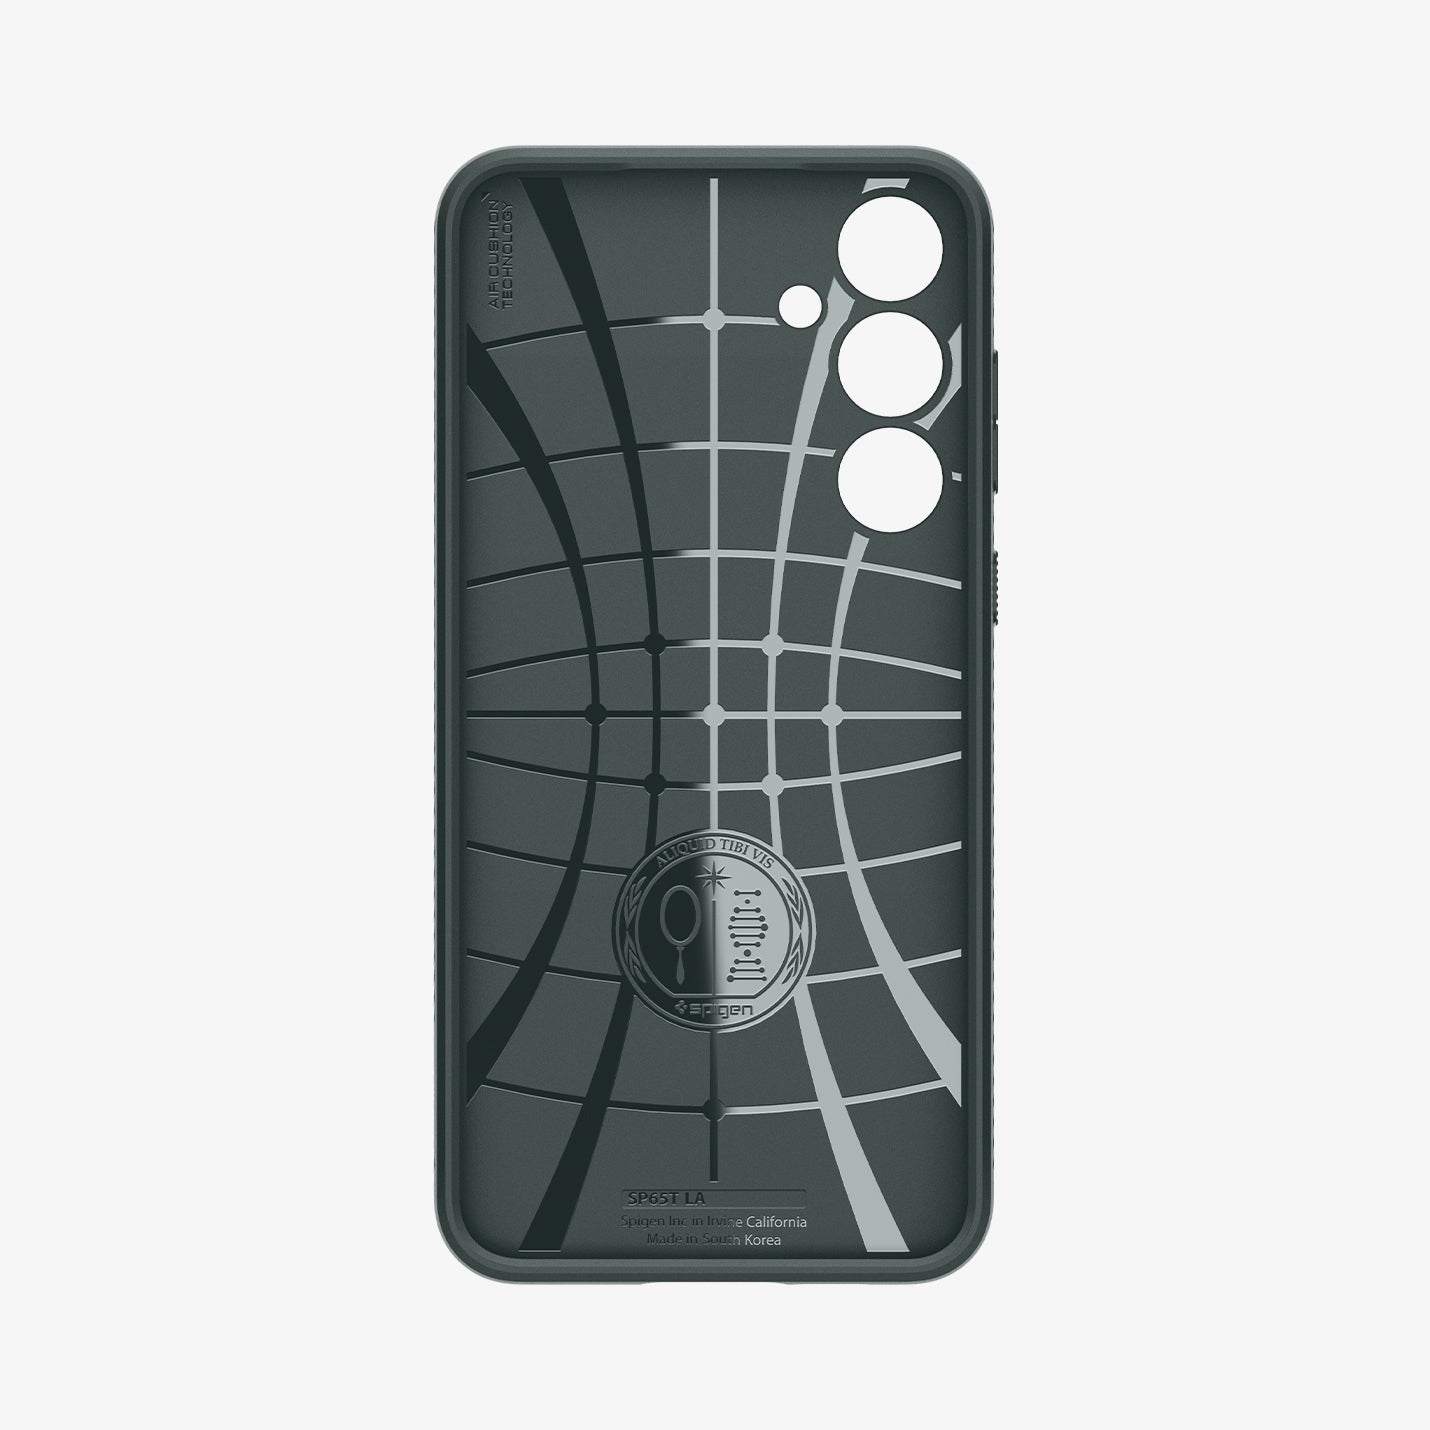 ACS07527 - Galaxy A55 5G Case Liquid Air in Abyss Green showing the inner case with spider web pattern